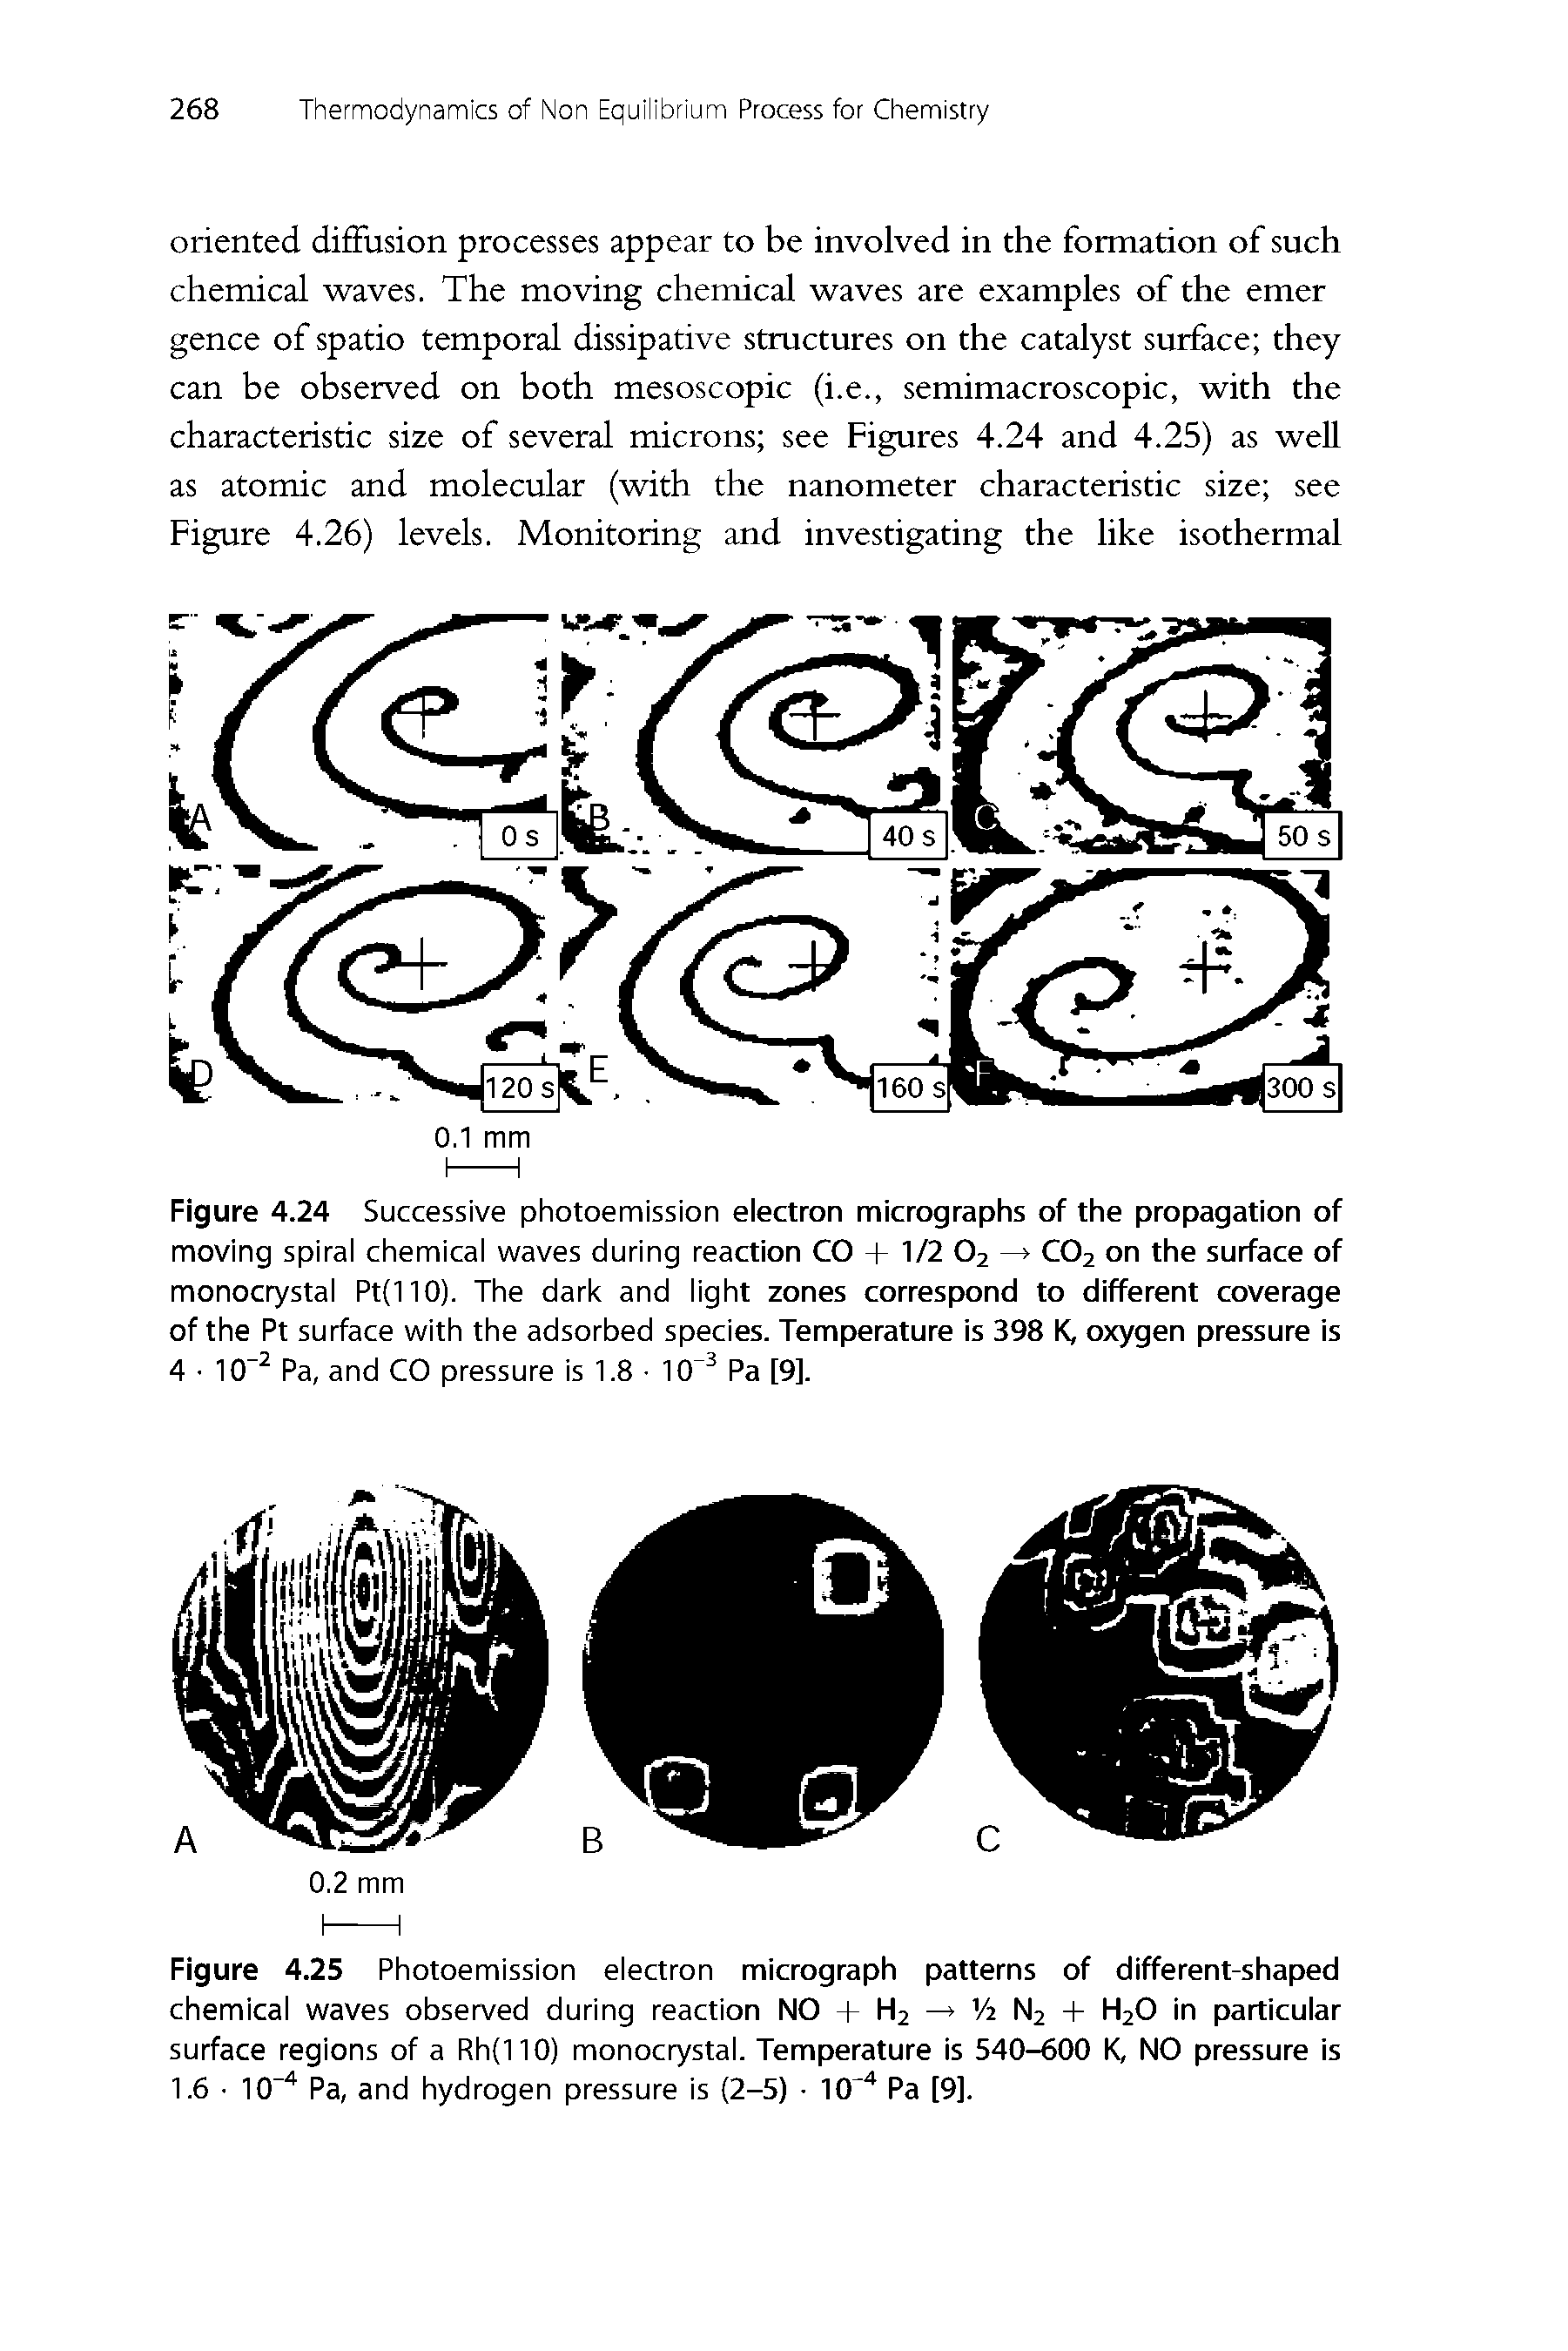 Figure 4.24 Successive photoemission electron micrographs of the propagation of moving spiral chemical waves during reaction CO + 1/2 O2 —> CO2 on the surface of monocrystal Pt(llO). The dark and light zones correspond to different coverage of the Pt surface with the adsorbed species. Temperature is 398 K, oxygen pressure is 4-10 Pa, and CO pressure is 1.8 10 Pa [9].